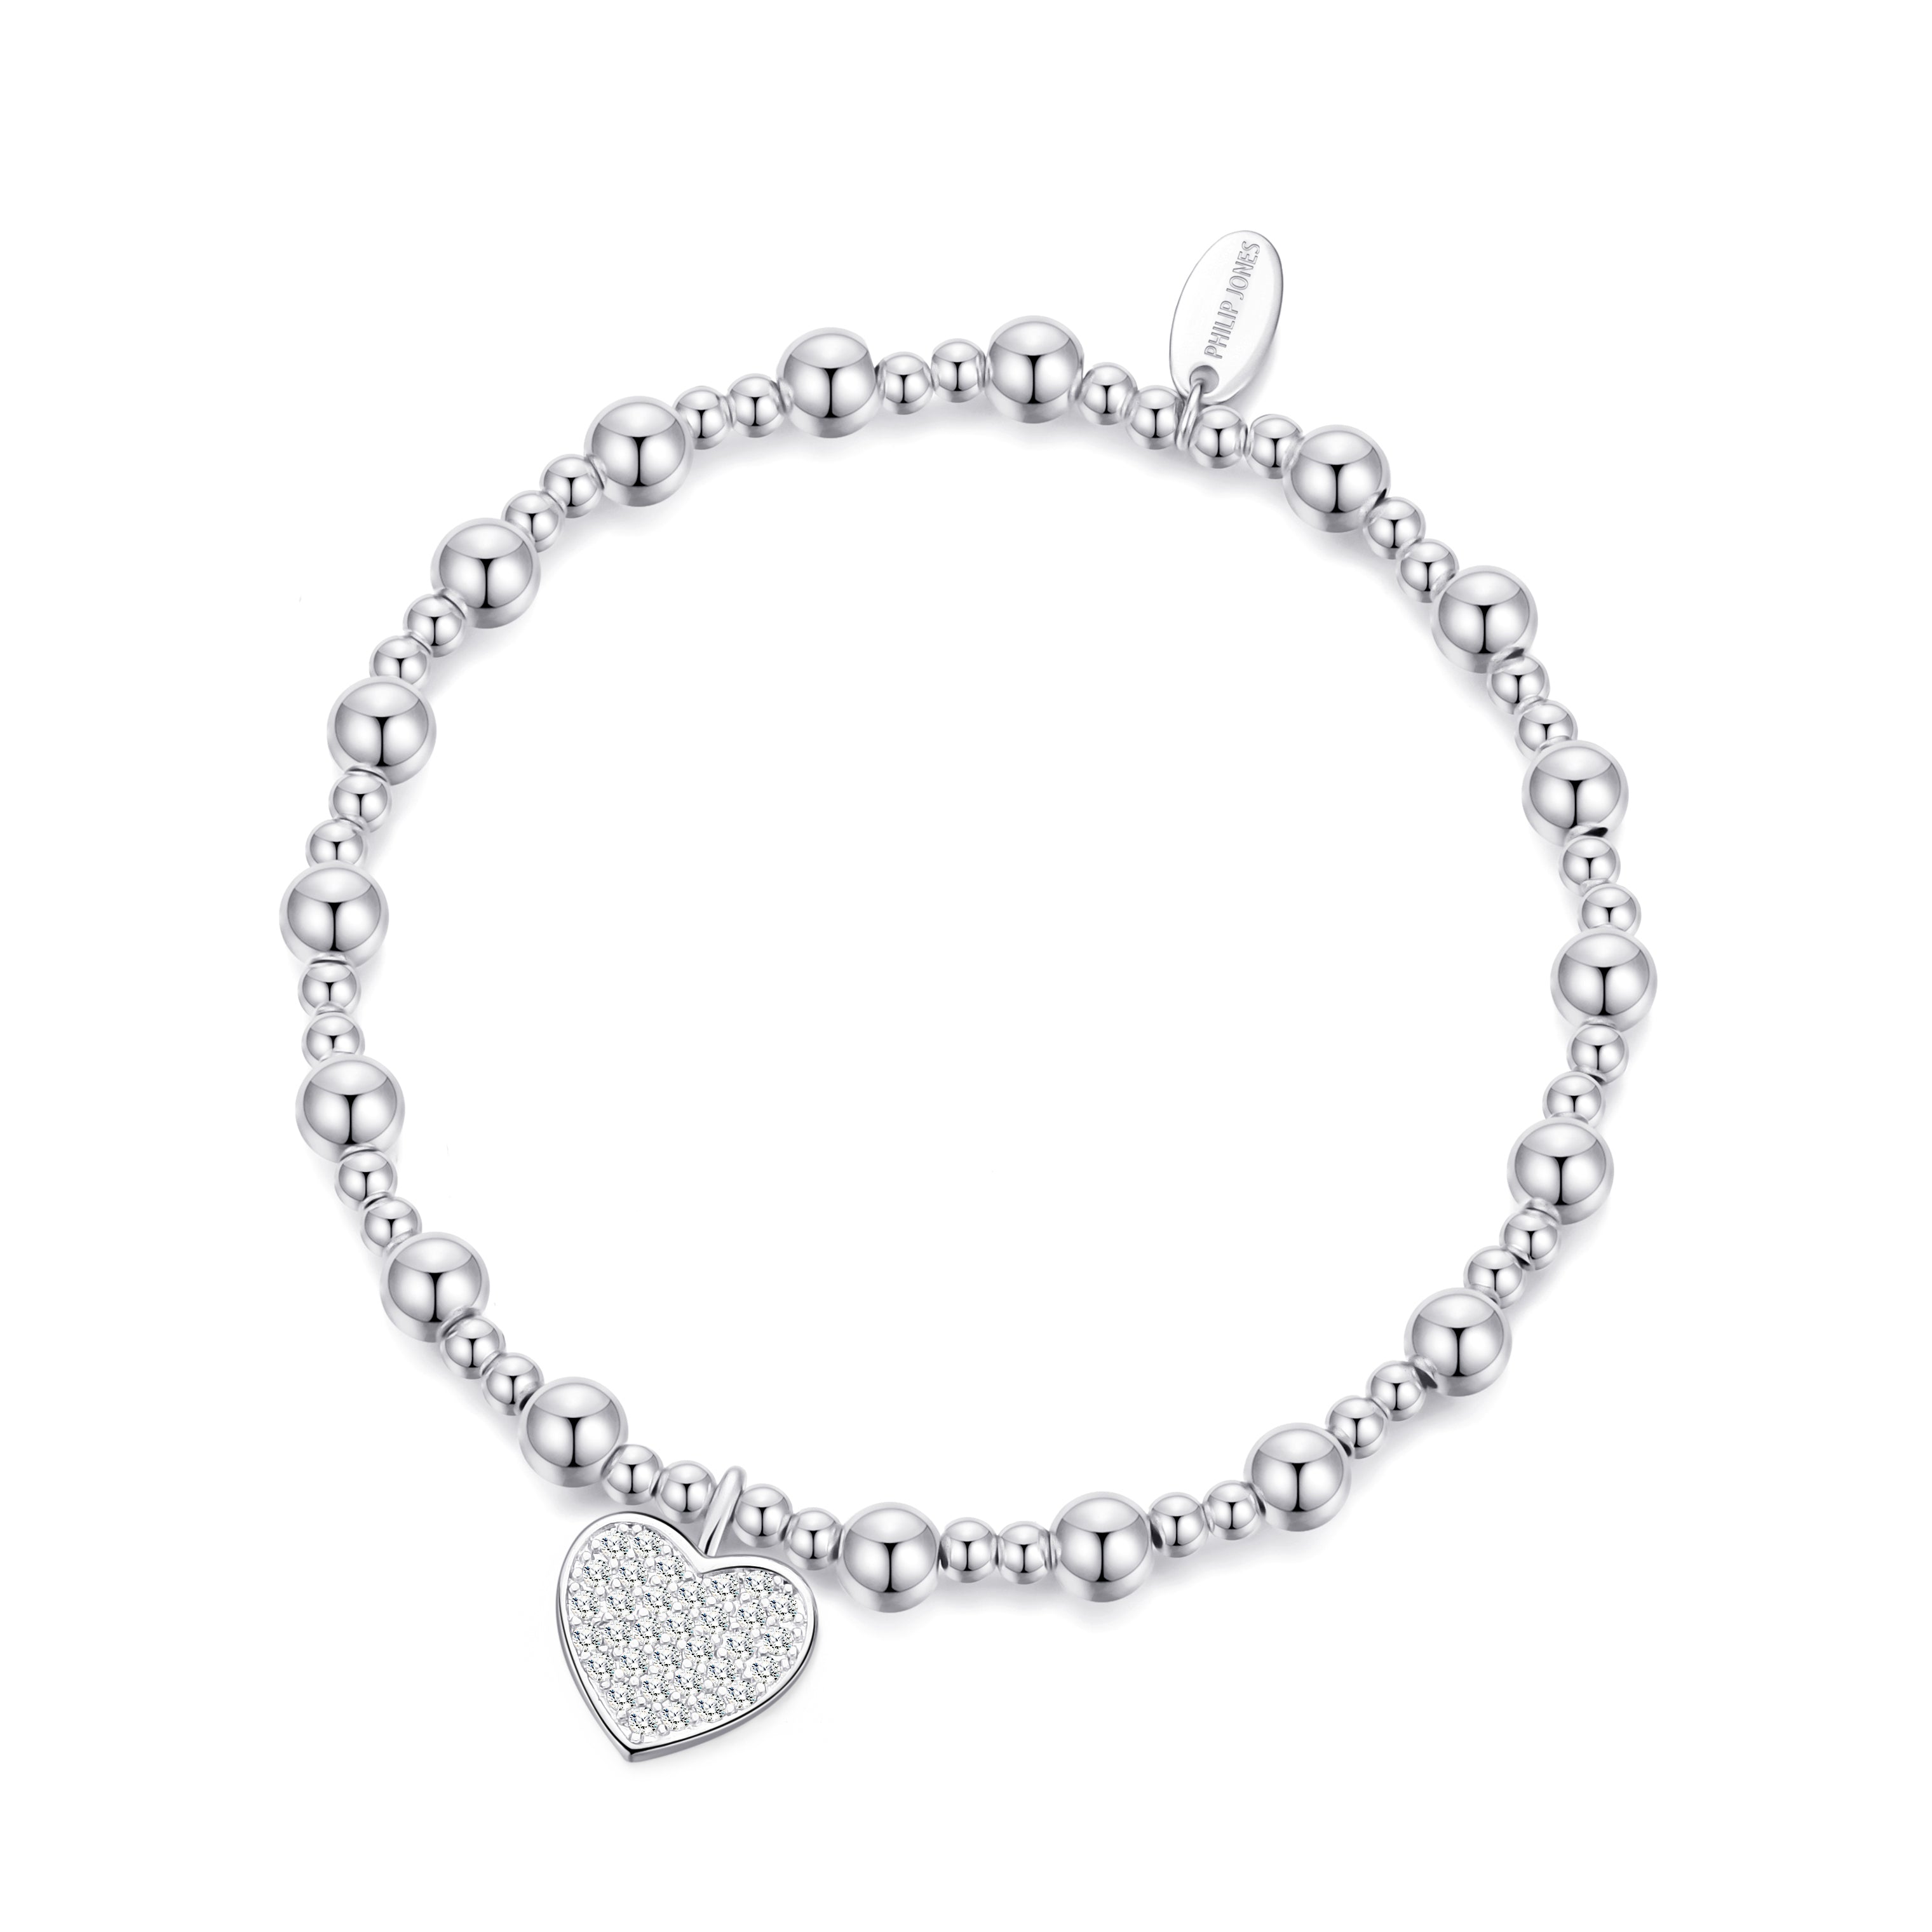 60th Birthday Heart Charm Stretch Bracelet with Quote Gift Box